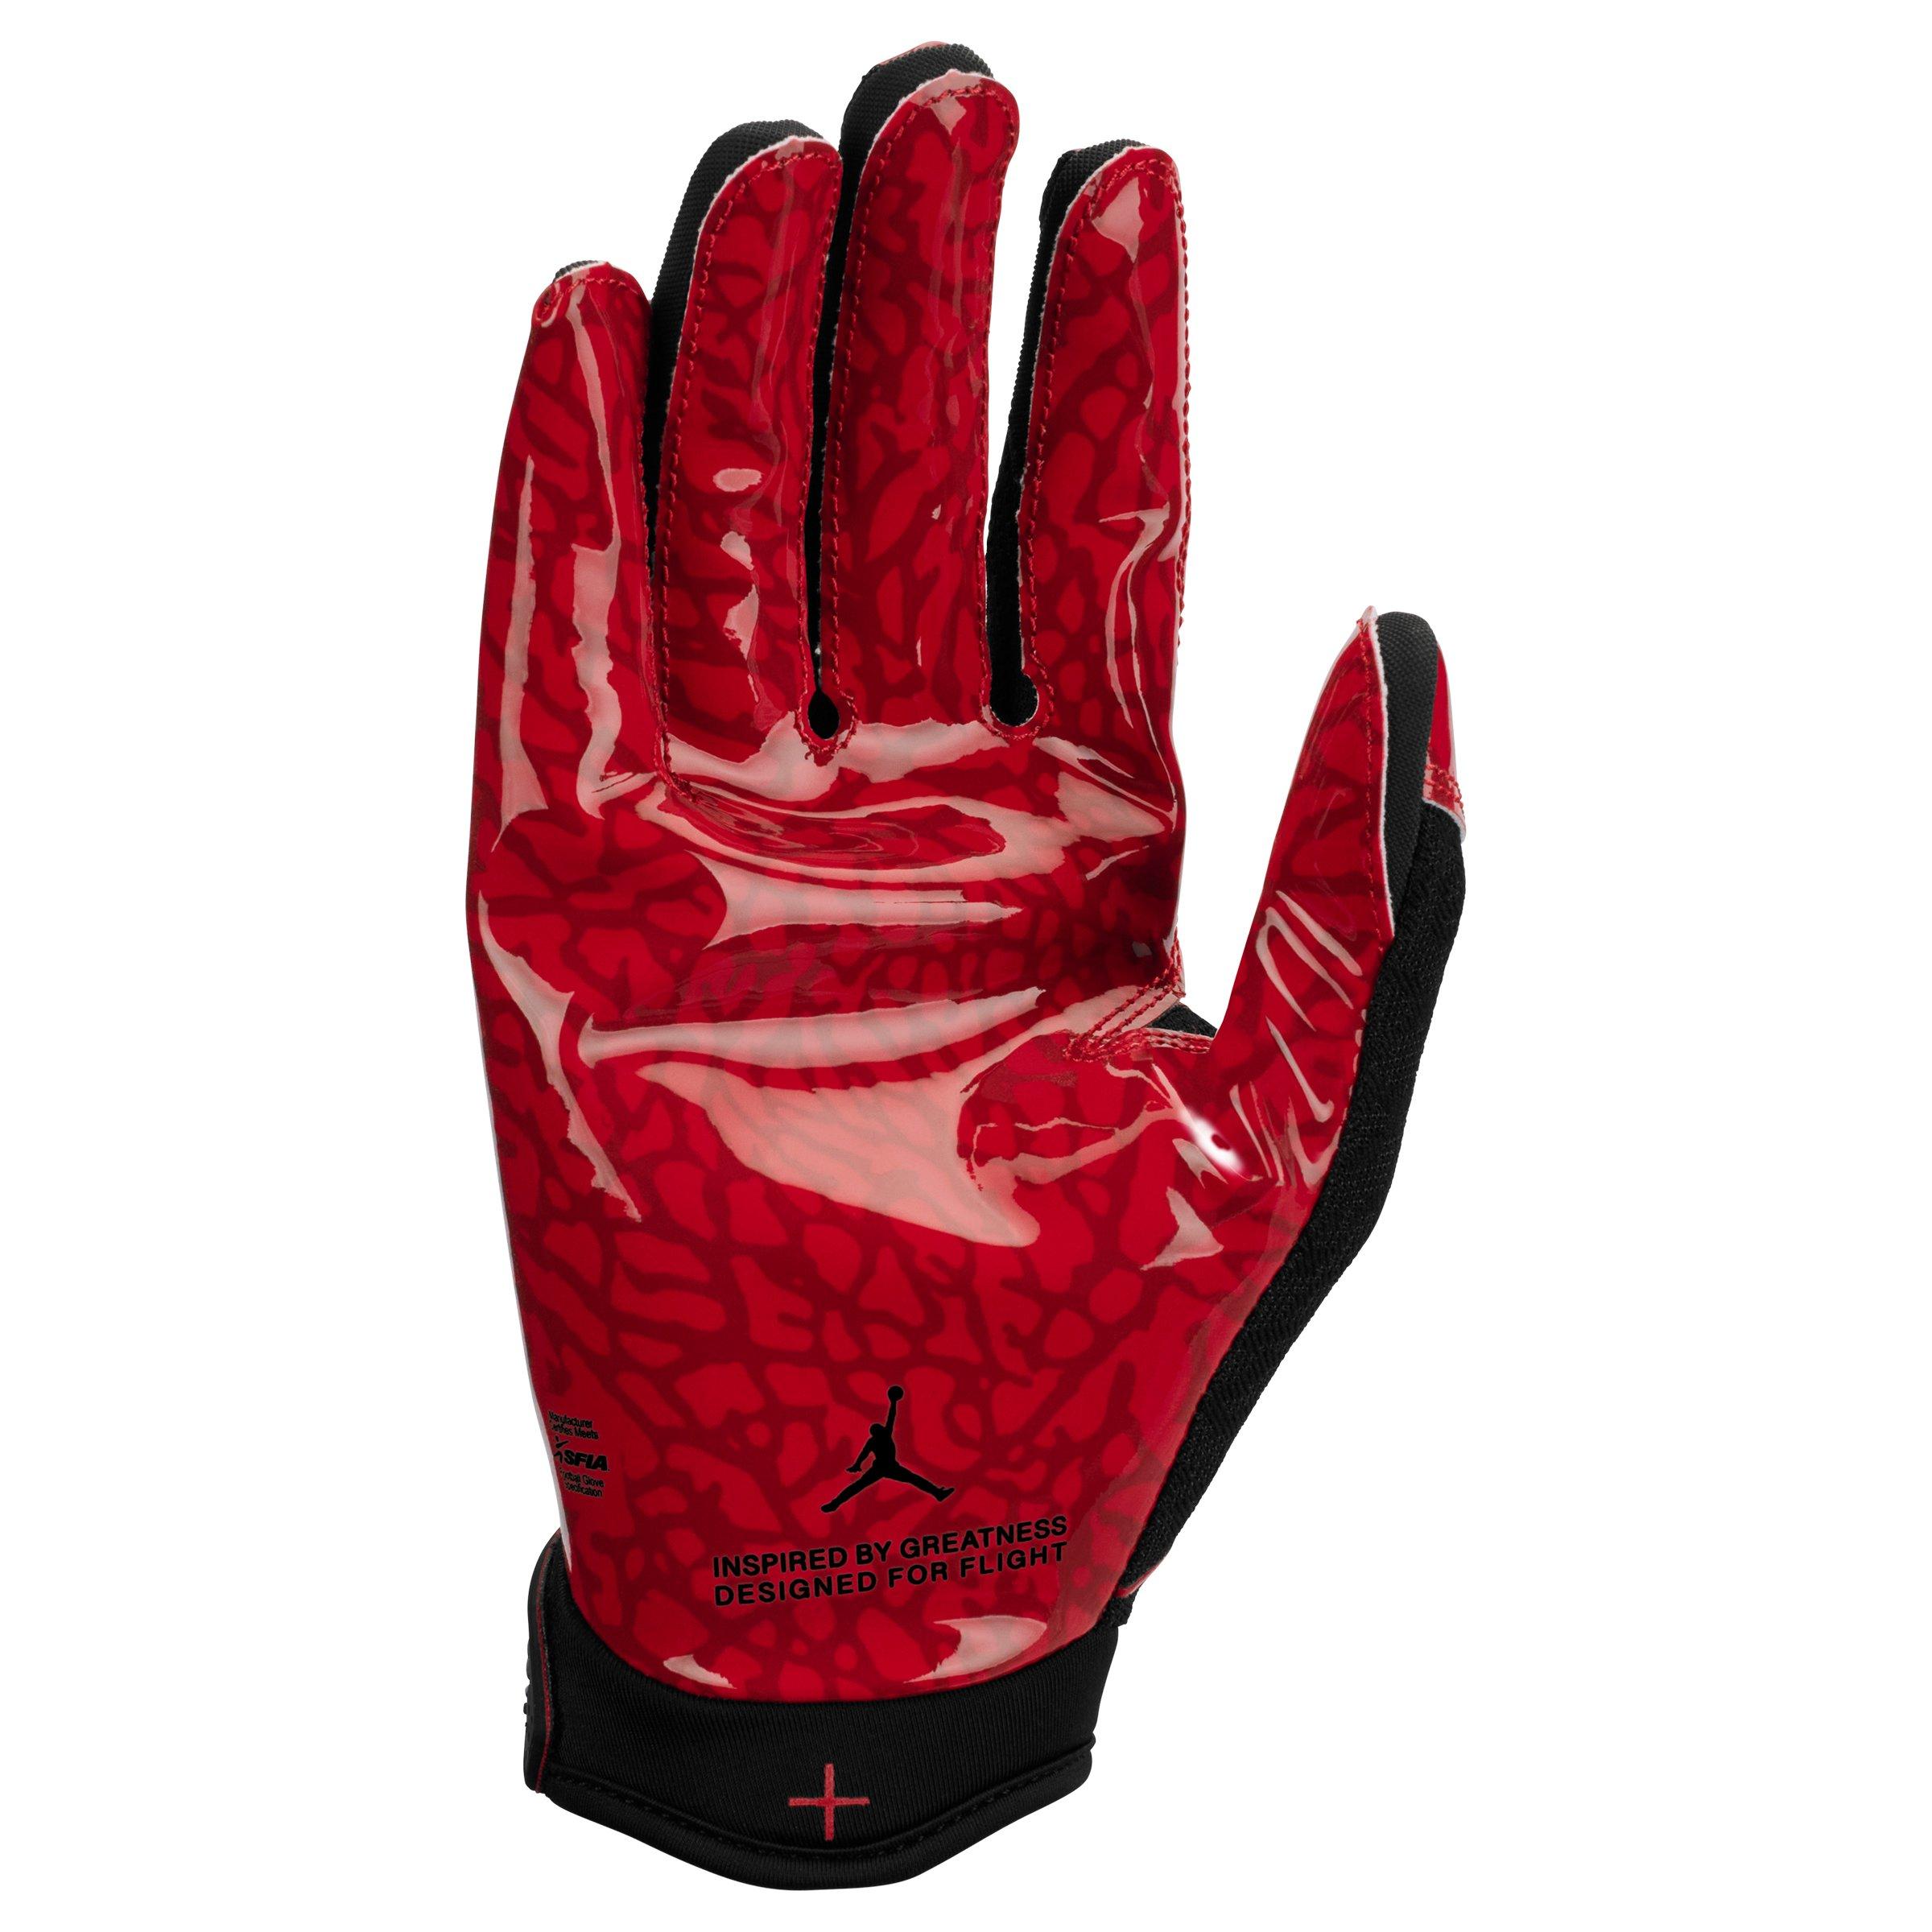 Grip The Greatness - Football Gloves & More